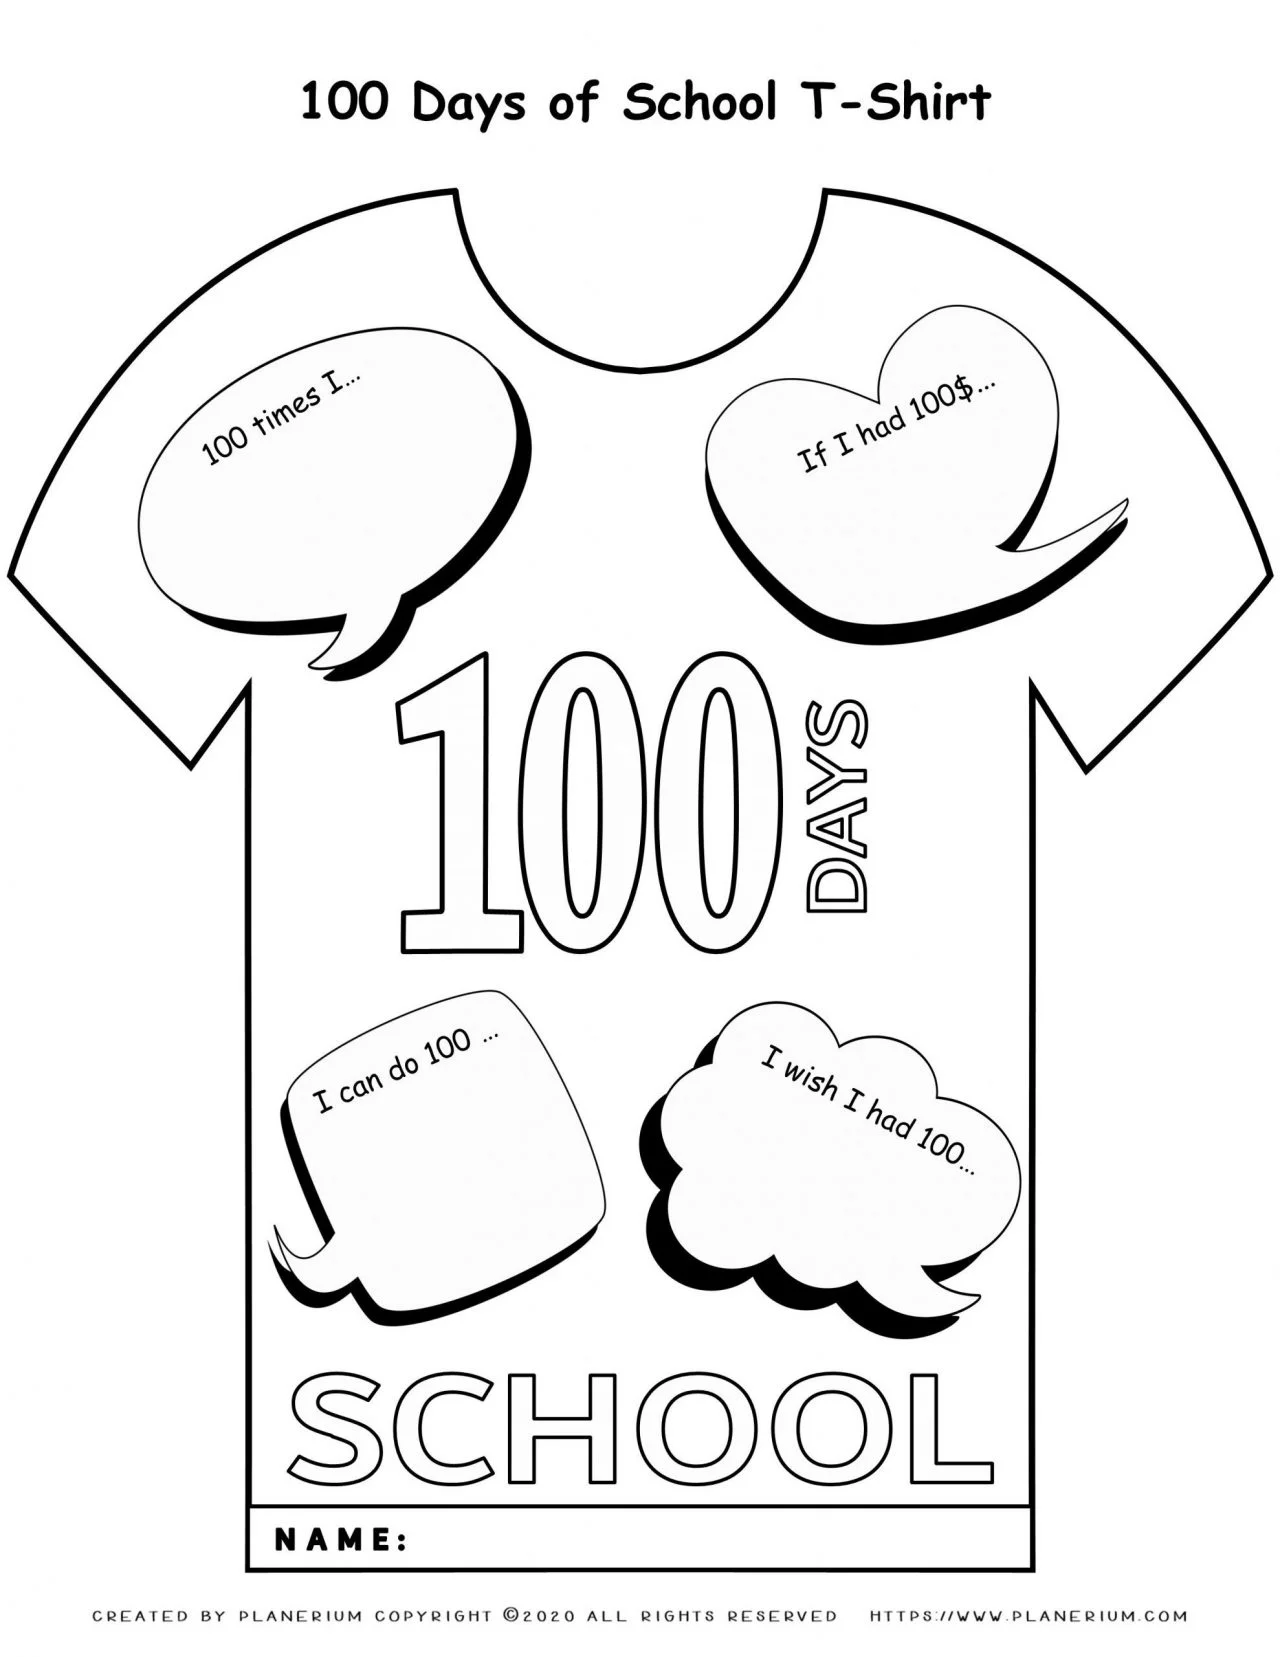 100 Days of School - Coloring Page - 100 Days T-Shirt | Planerium